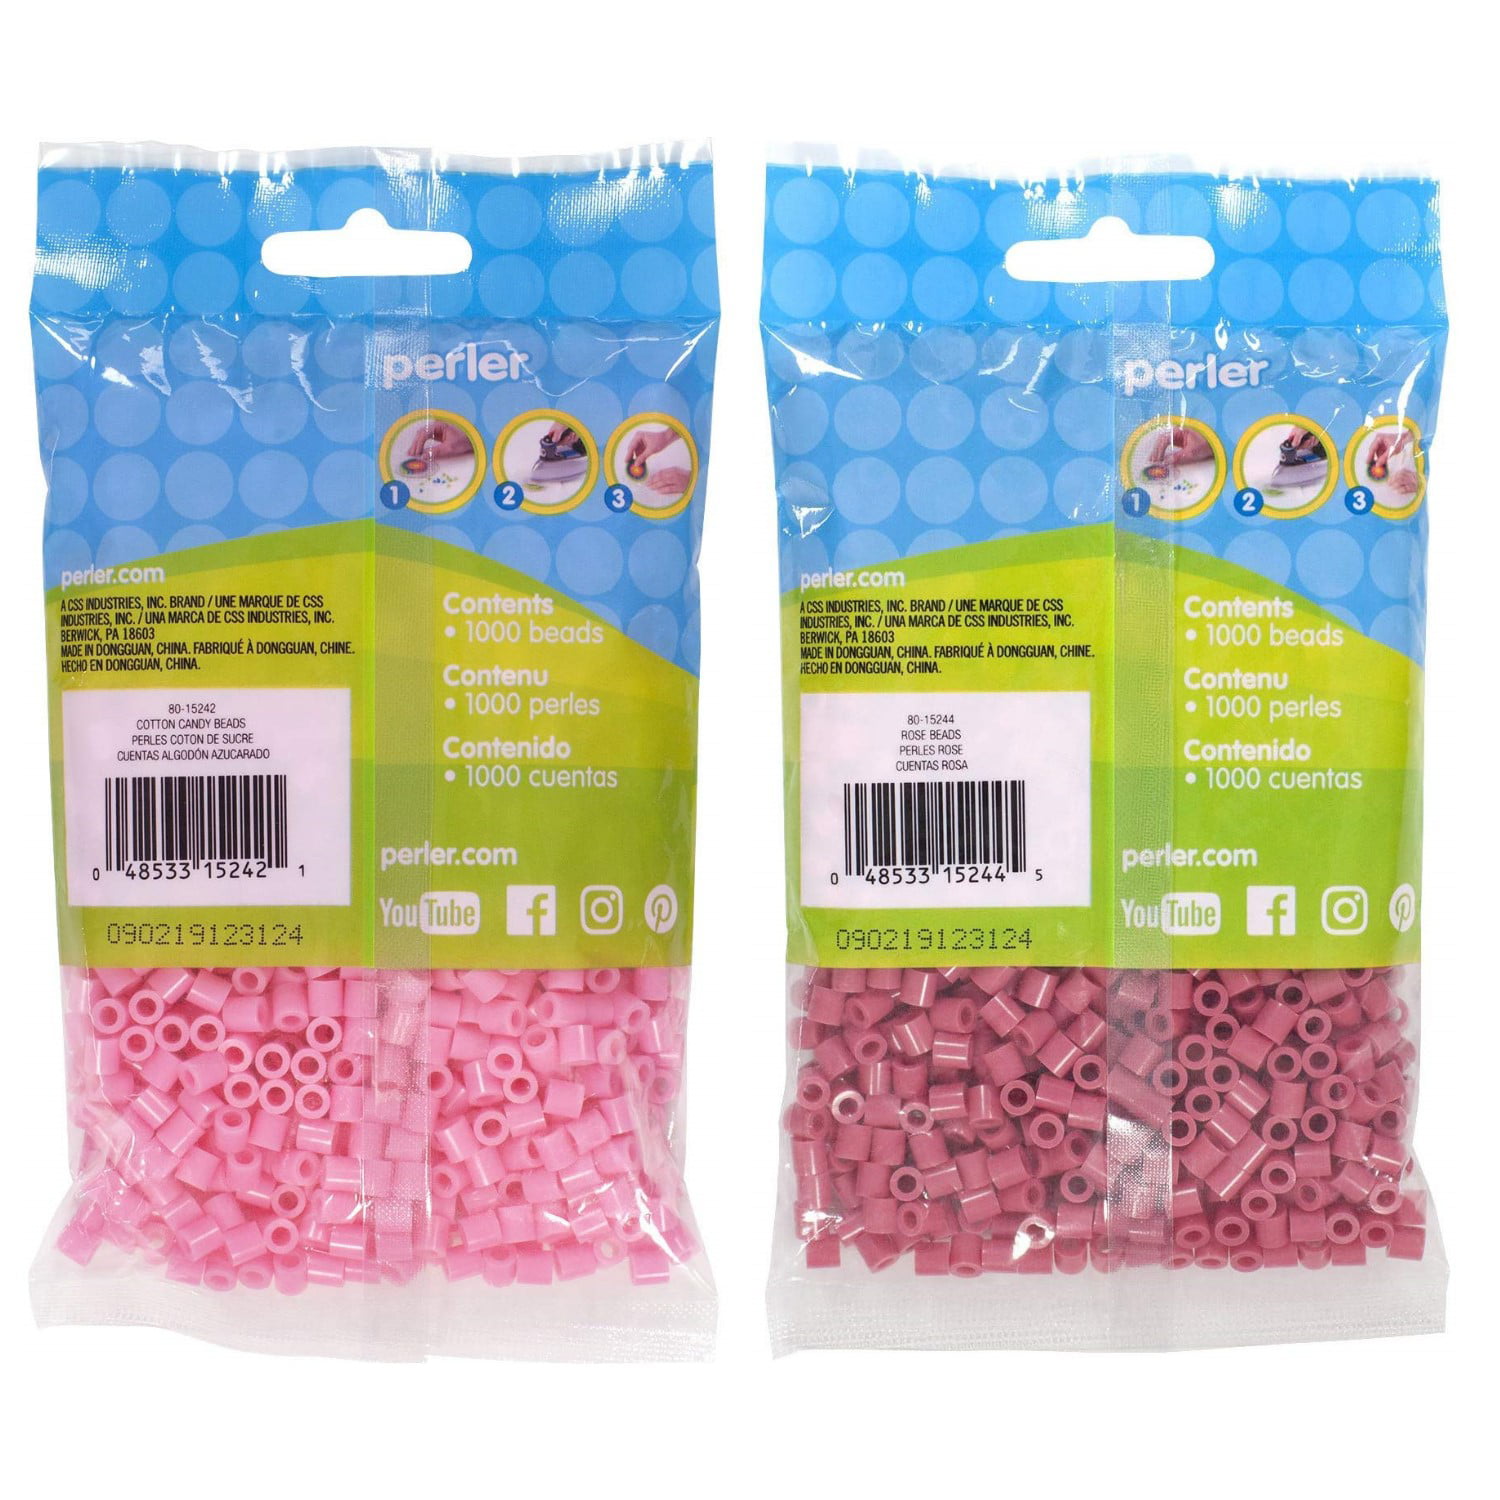 Perler Bead Bag 1000, Bundle of Cranapple and Cherry Red (2 Pack)